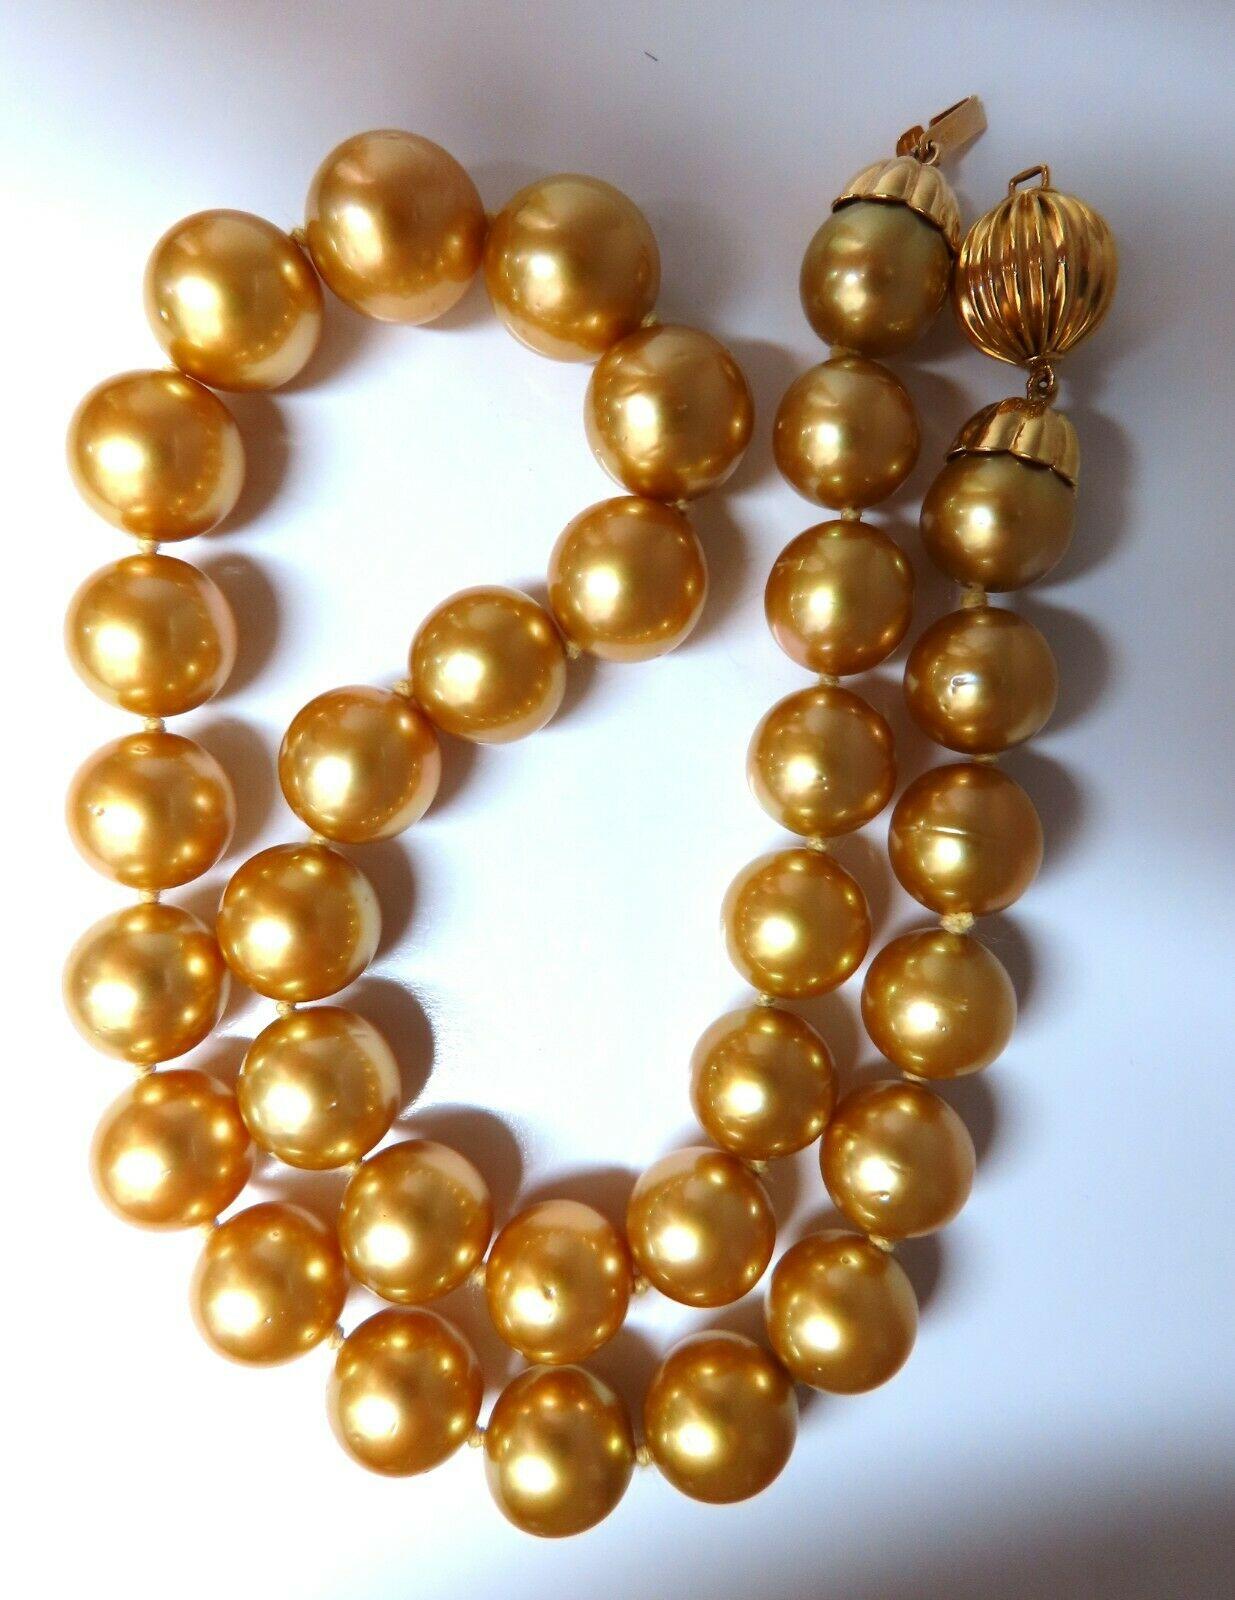 Executive GIA Certified South Sea Golden Yellow Pearls Necklace

The Natural Pinctada maxima (gold tipped oysters)

Report: 2225105508

Saltwater golden, not enhanced

12.05 - 14.46mm

100 grams total weight

19 Inches

33 Pearls

14kt yellow gold